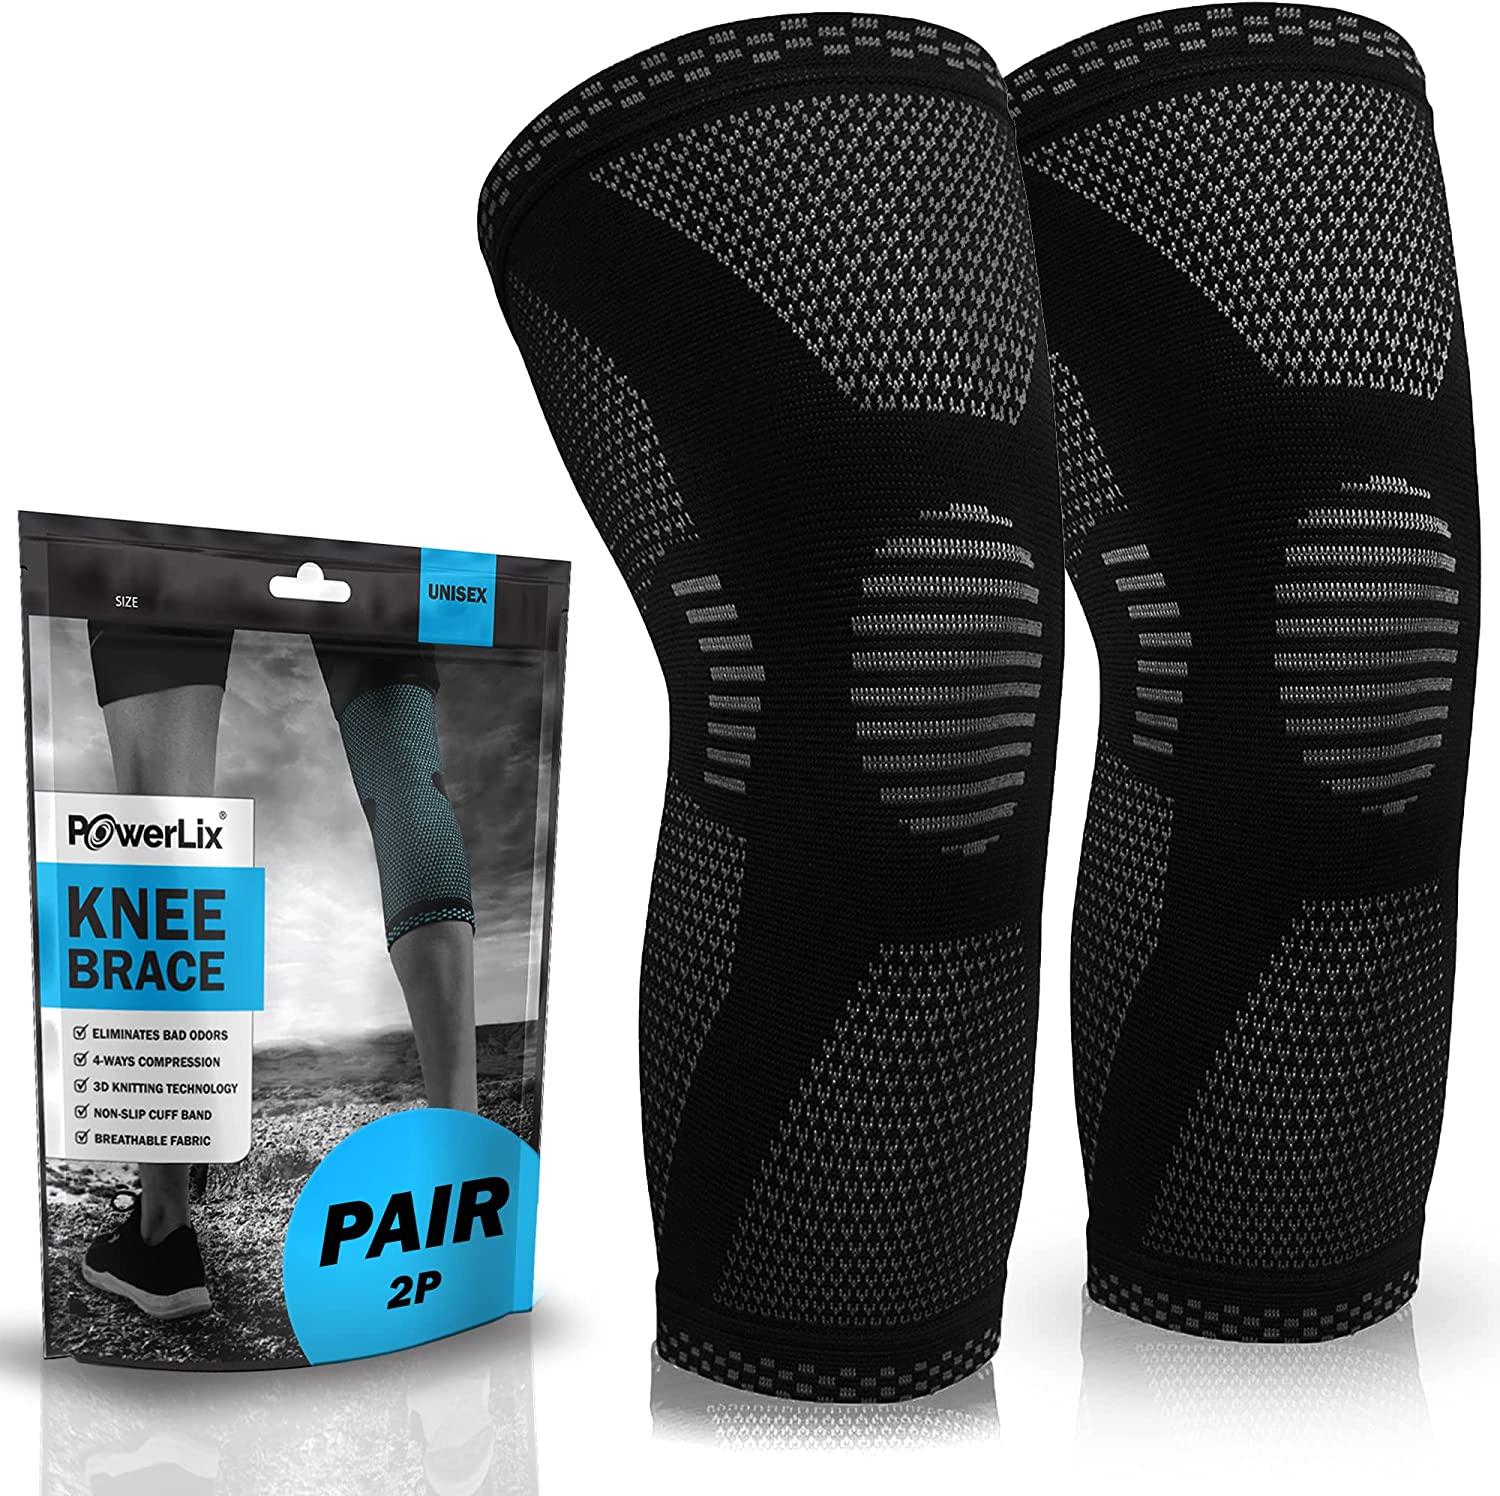 2 Powerlix Knee Compression Sleeves for $7.98 Shipped